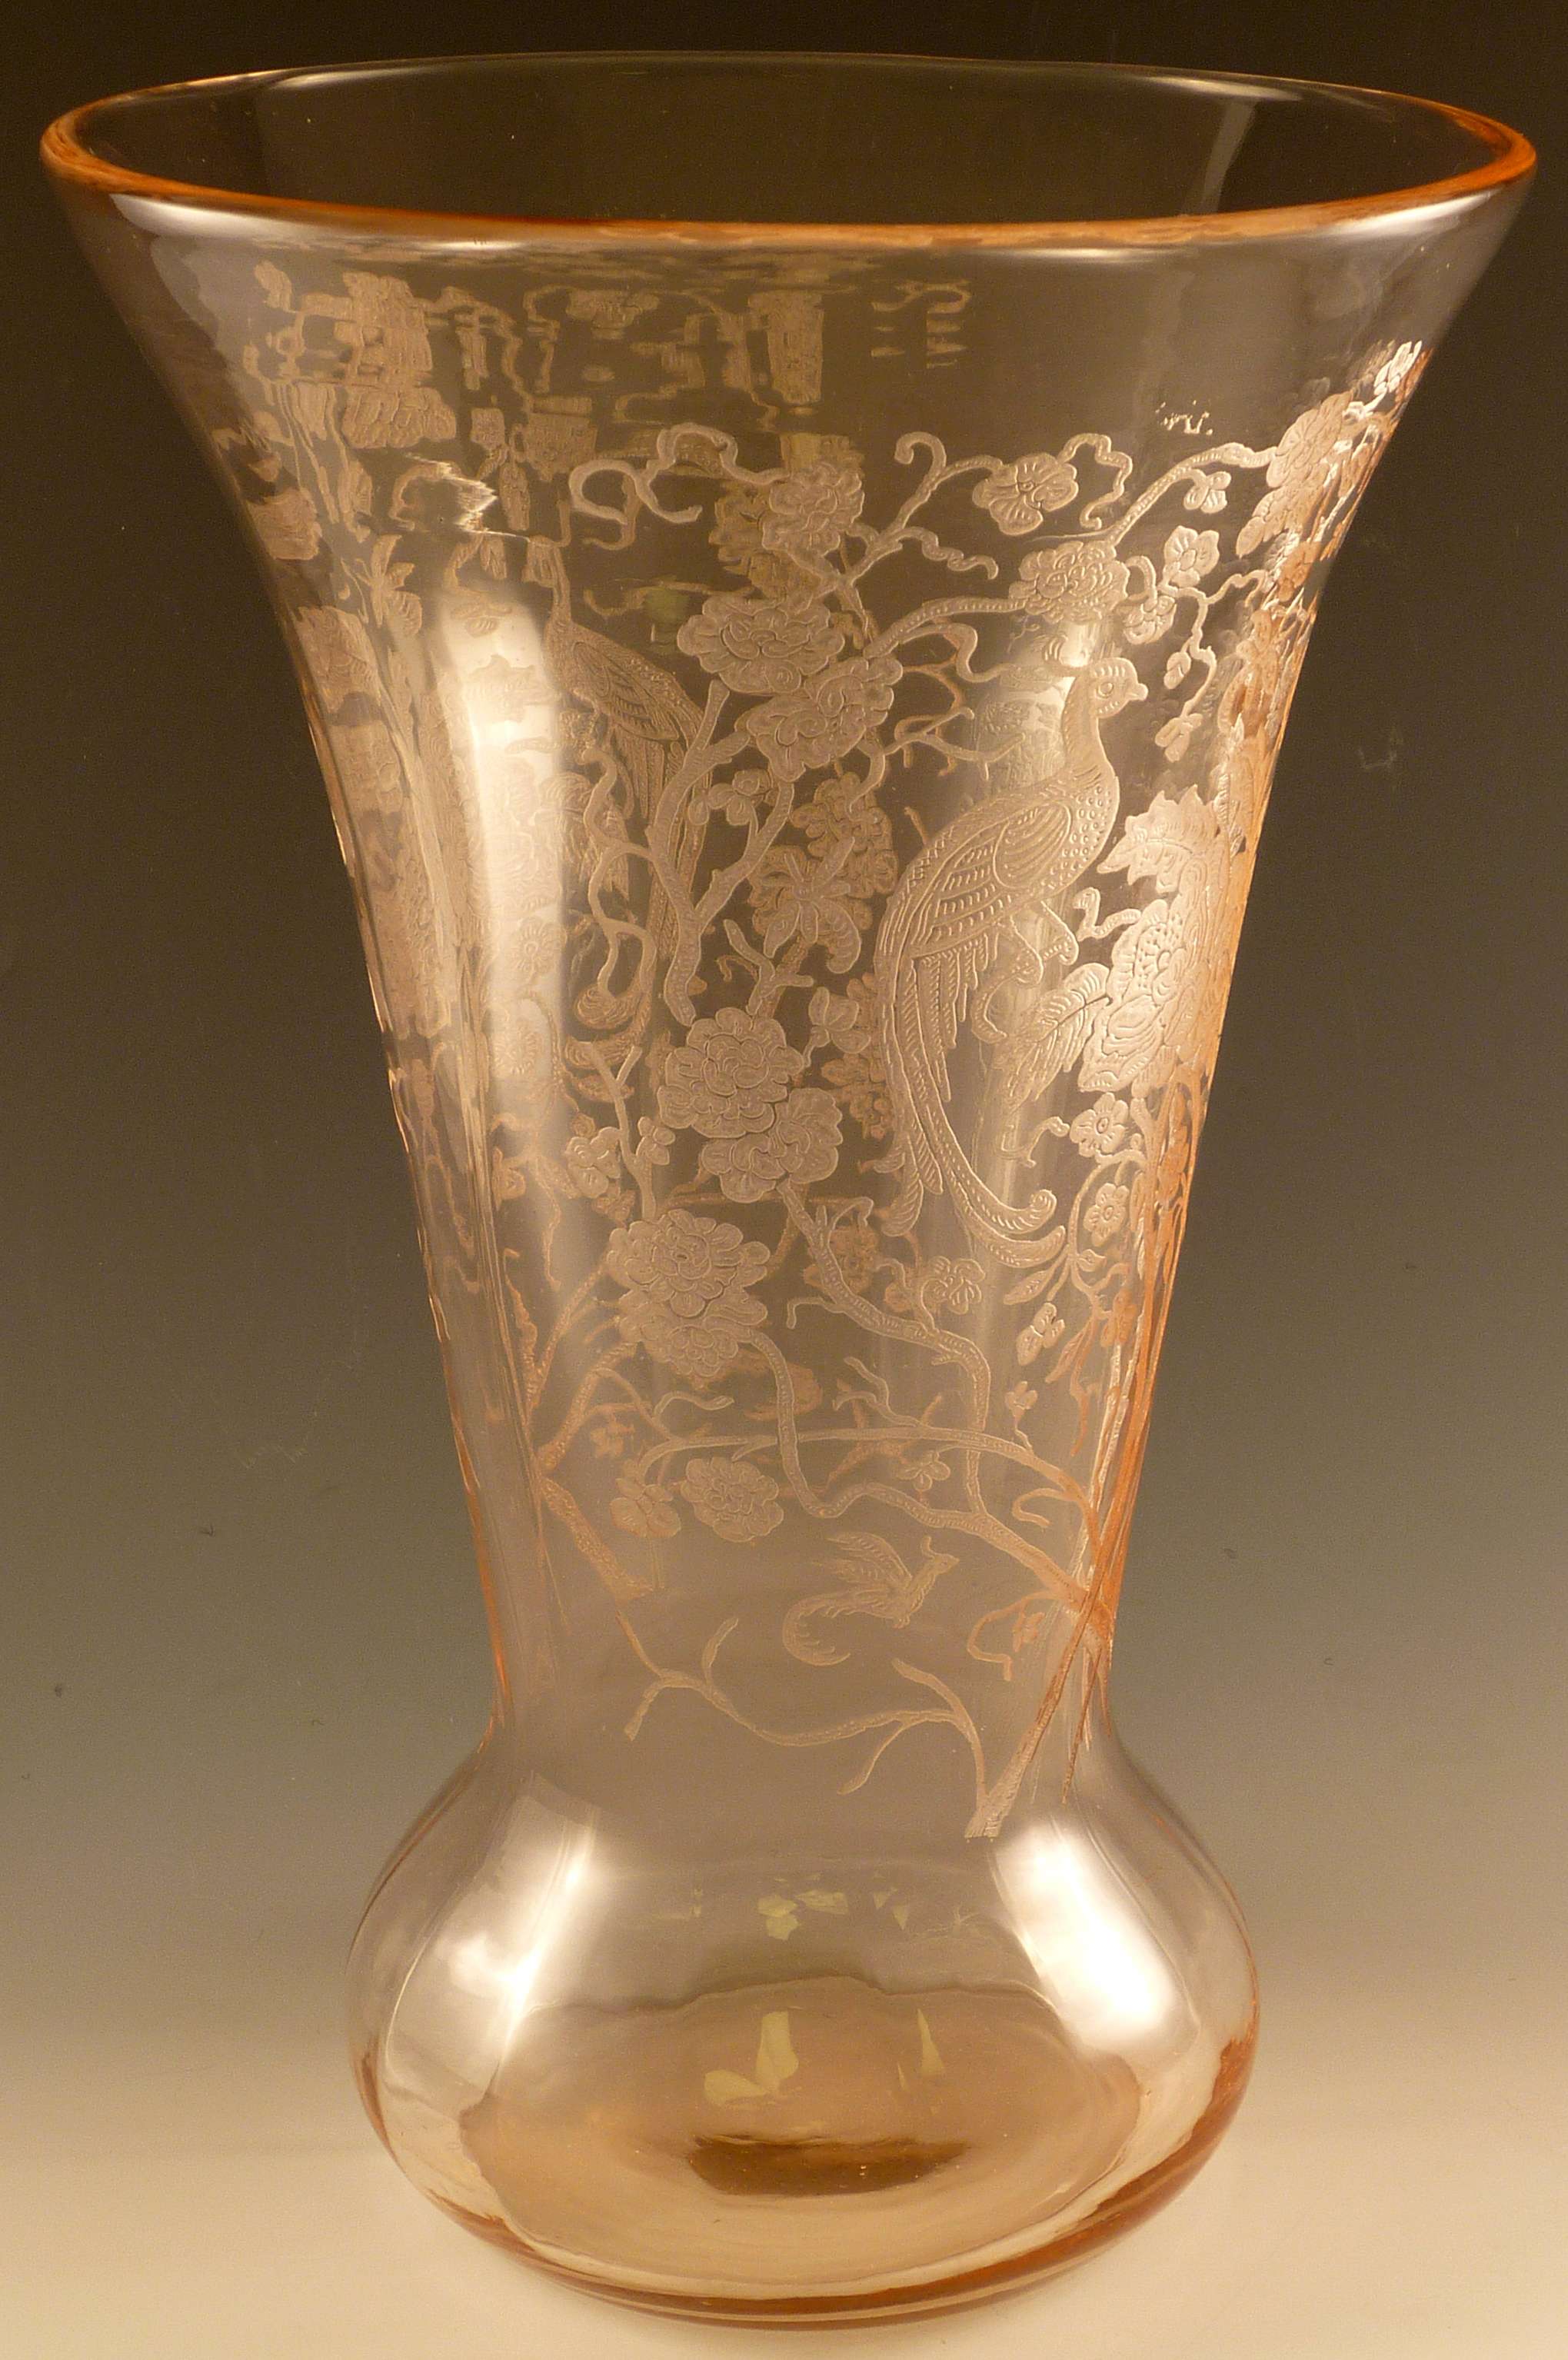 What are some tips for buying antique glass vases?